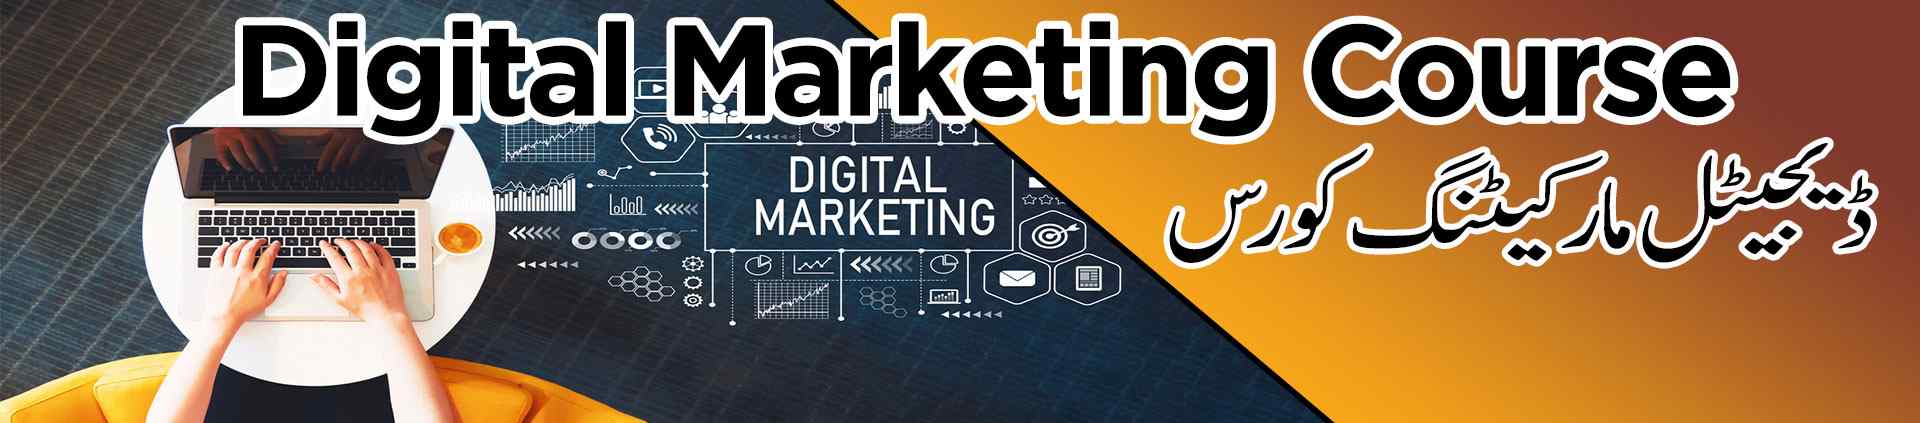 Digital Marketing Course Islamabad With Certificate